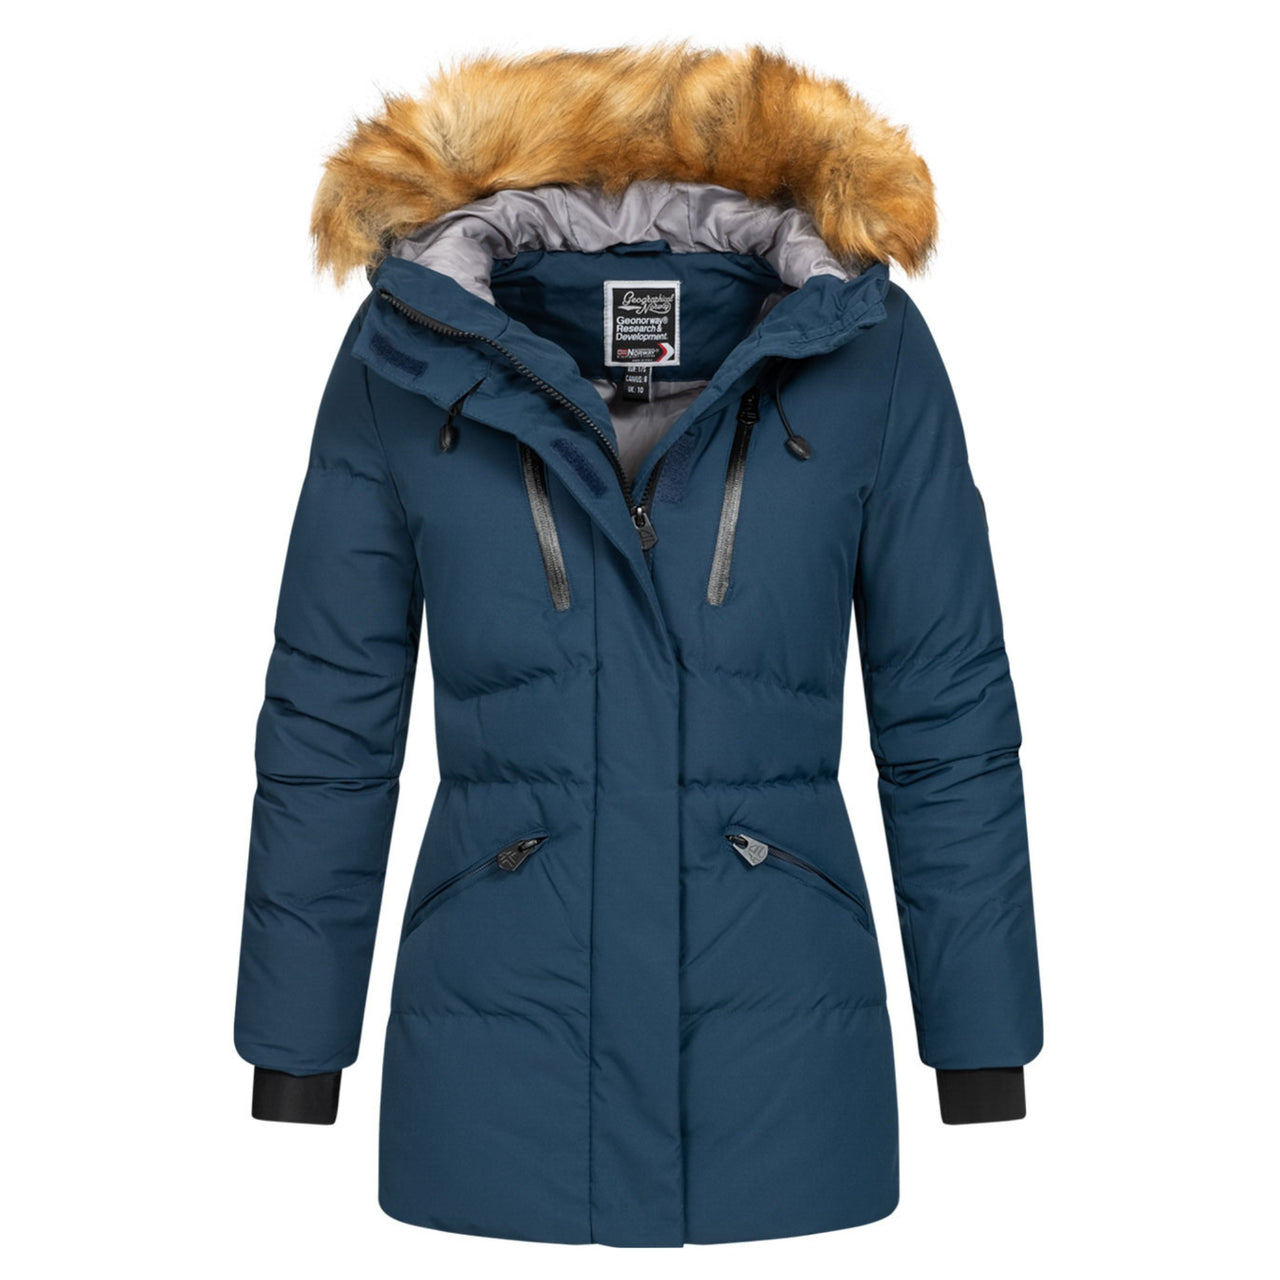 Geographical norway Parka mujer Azul